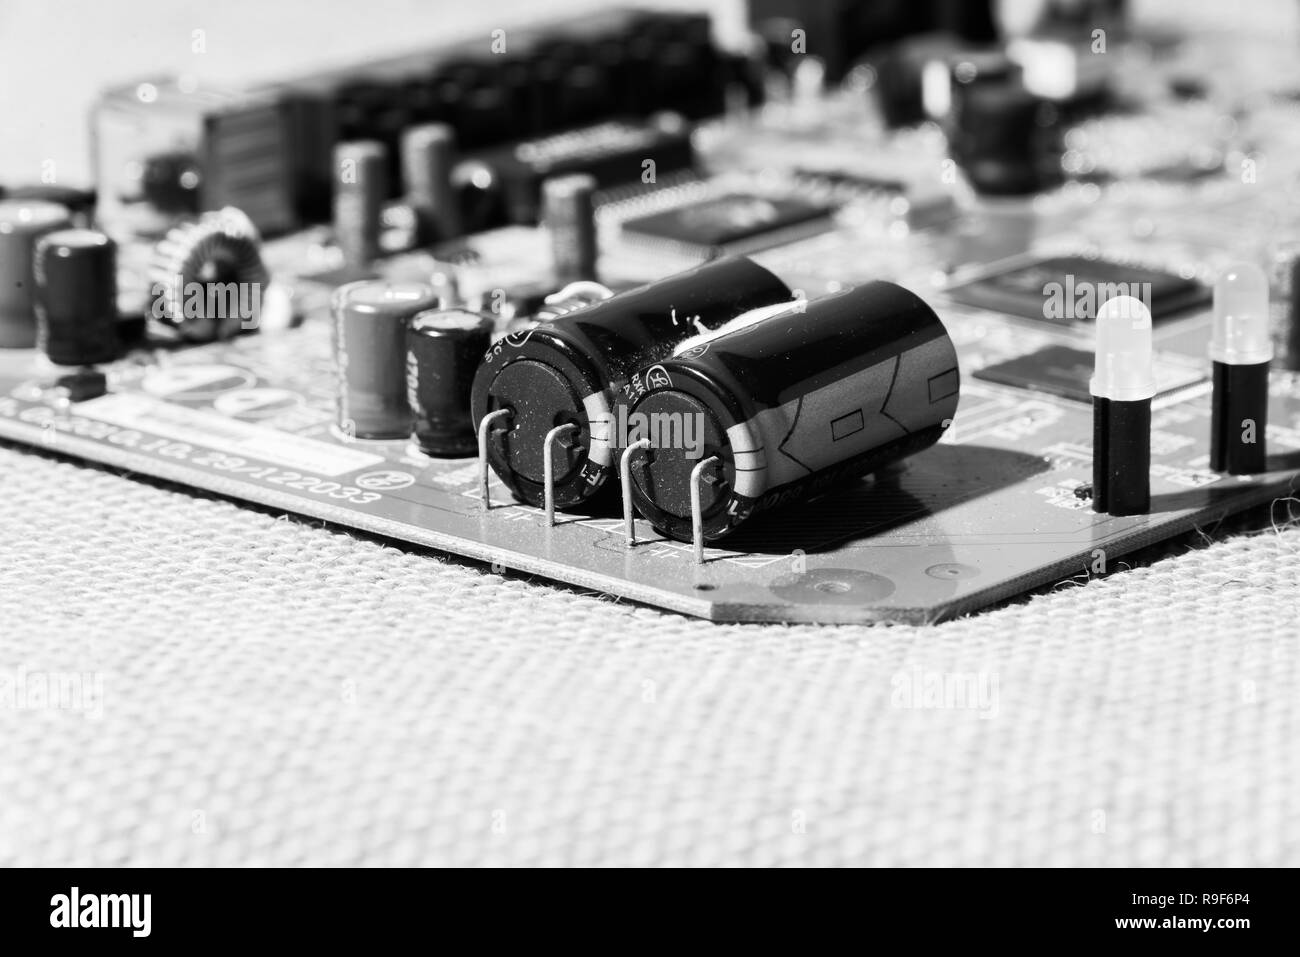 old electronic equipment with black and white style usefull as background Stock Photo